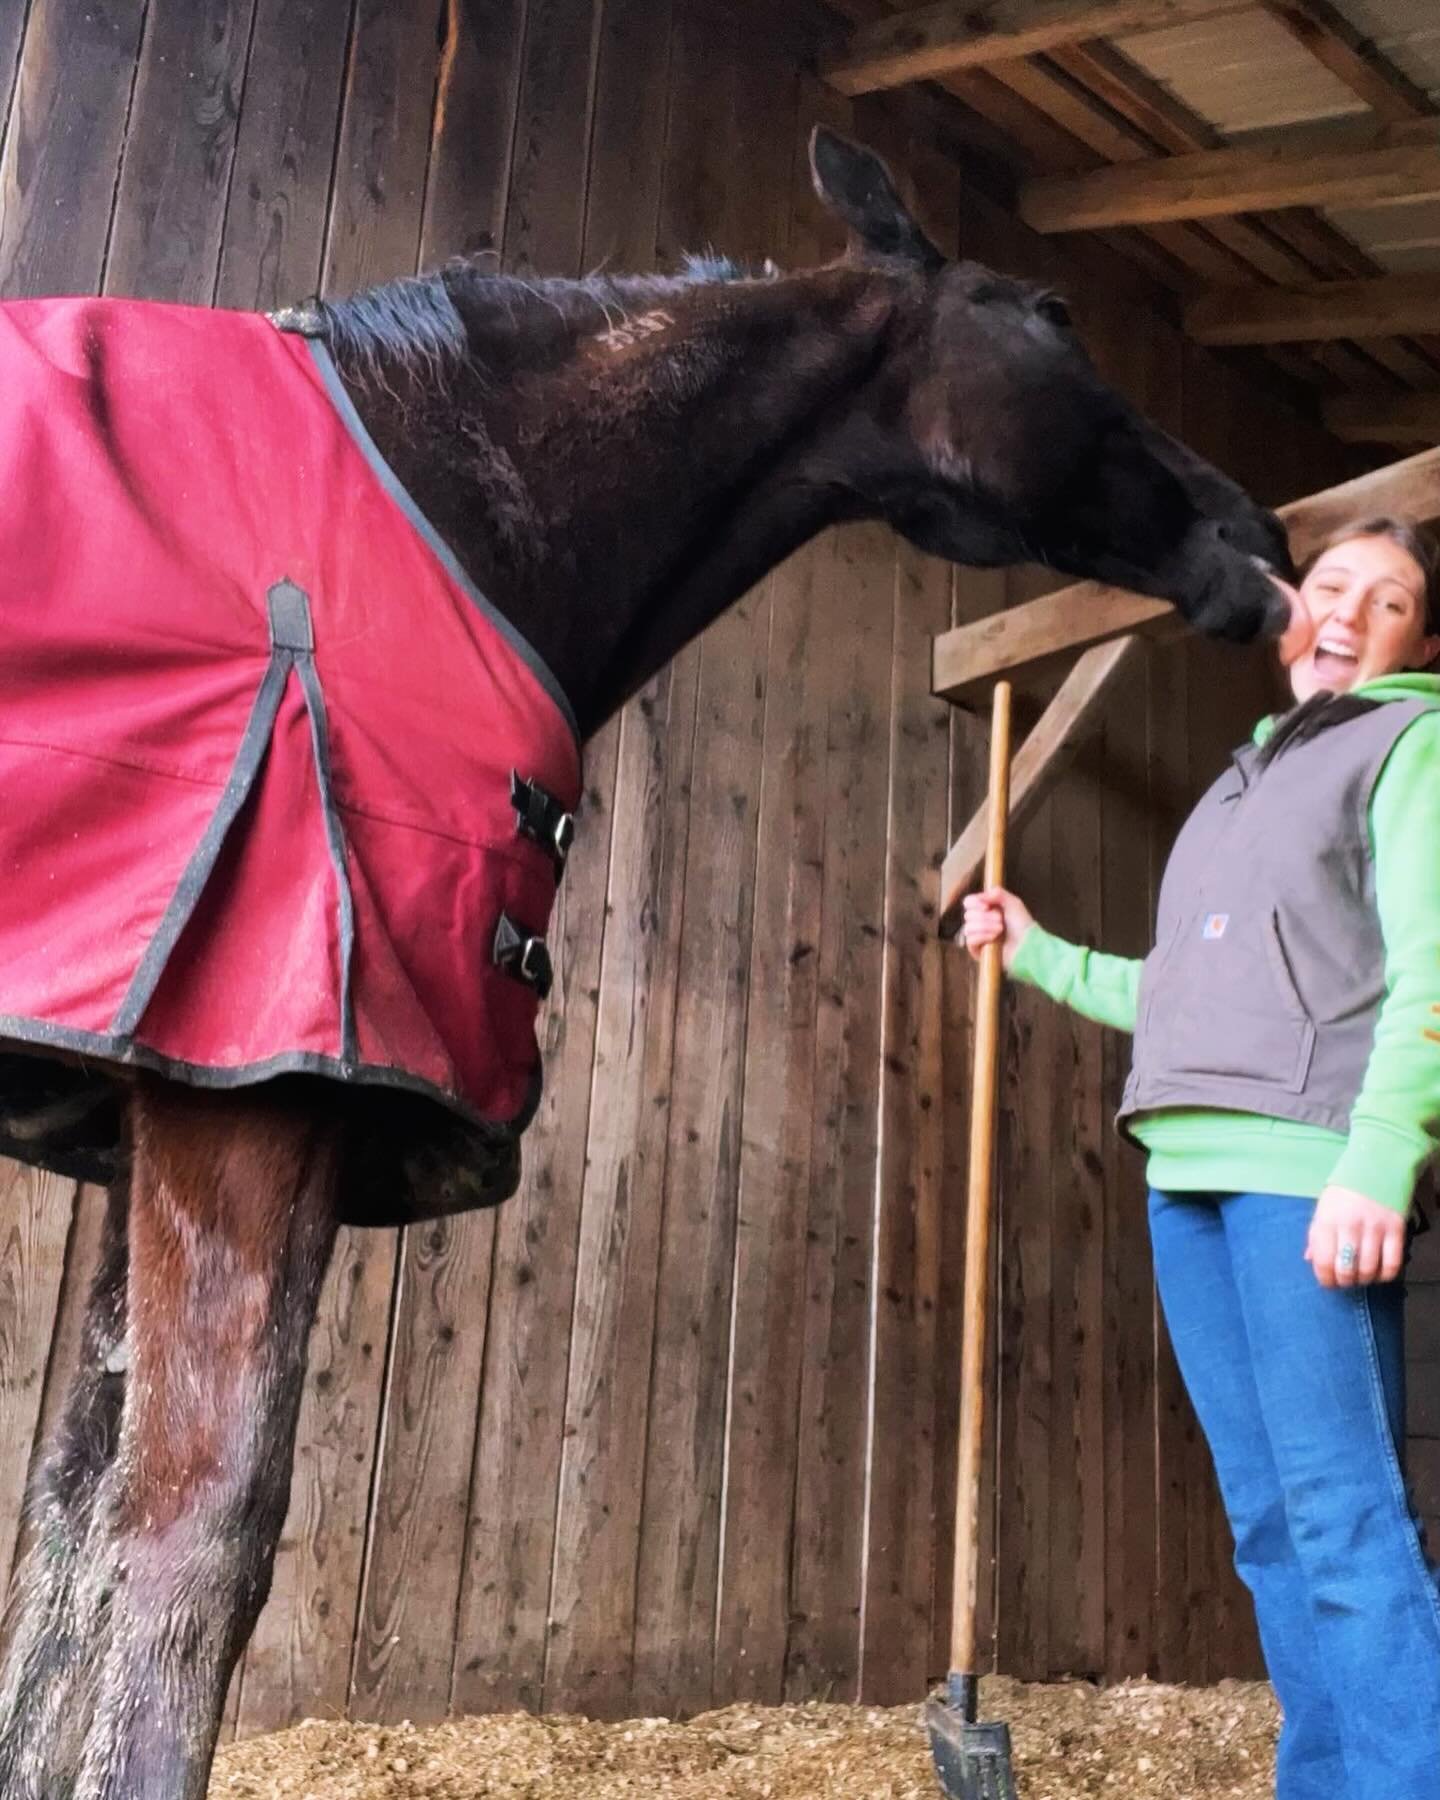 Thank you Maeve!! Have a super summer! Maeve one of our fabulous volunteers who just finished her last final exam yesterday is headed home for the summer! She volunteered regularly and many times a week with barn chores! Maeve was such an incredible 